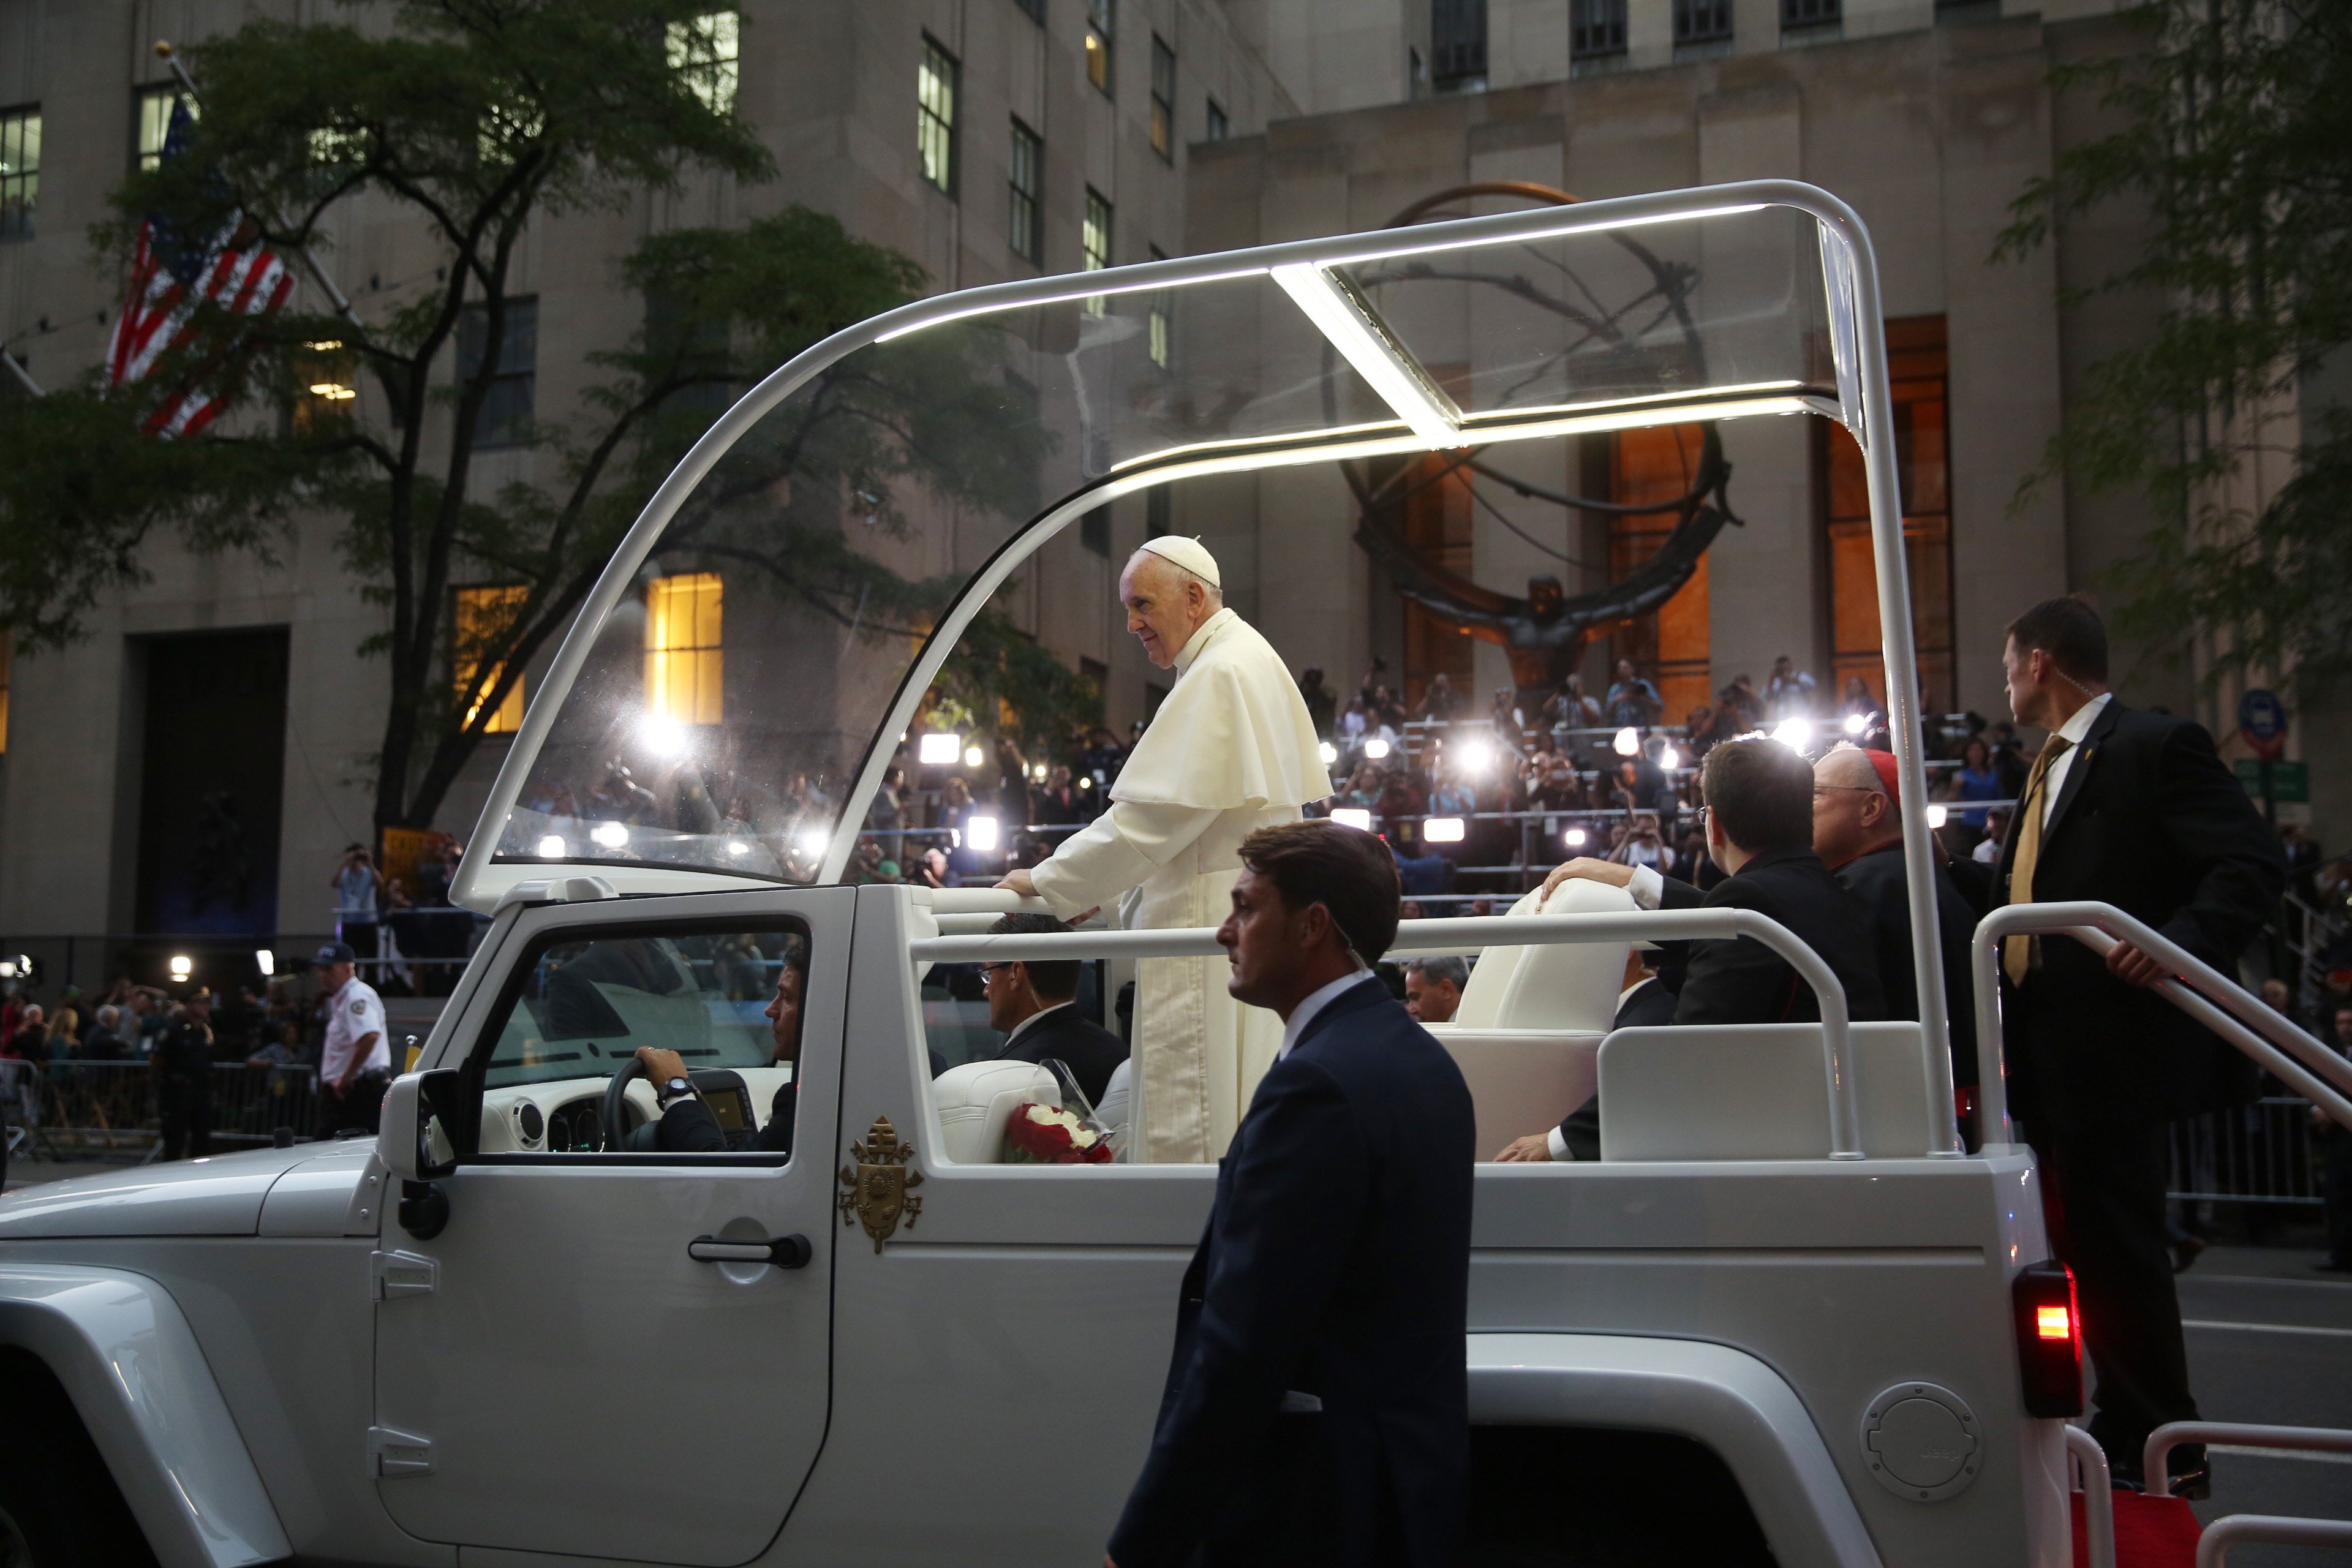 Pope Francis makes his way down 5th Avenue in New York City to St. Patrick's Cathedral in New York City on Sept. 24, 2015.